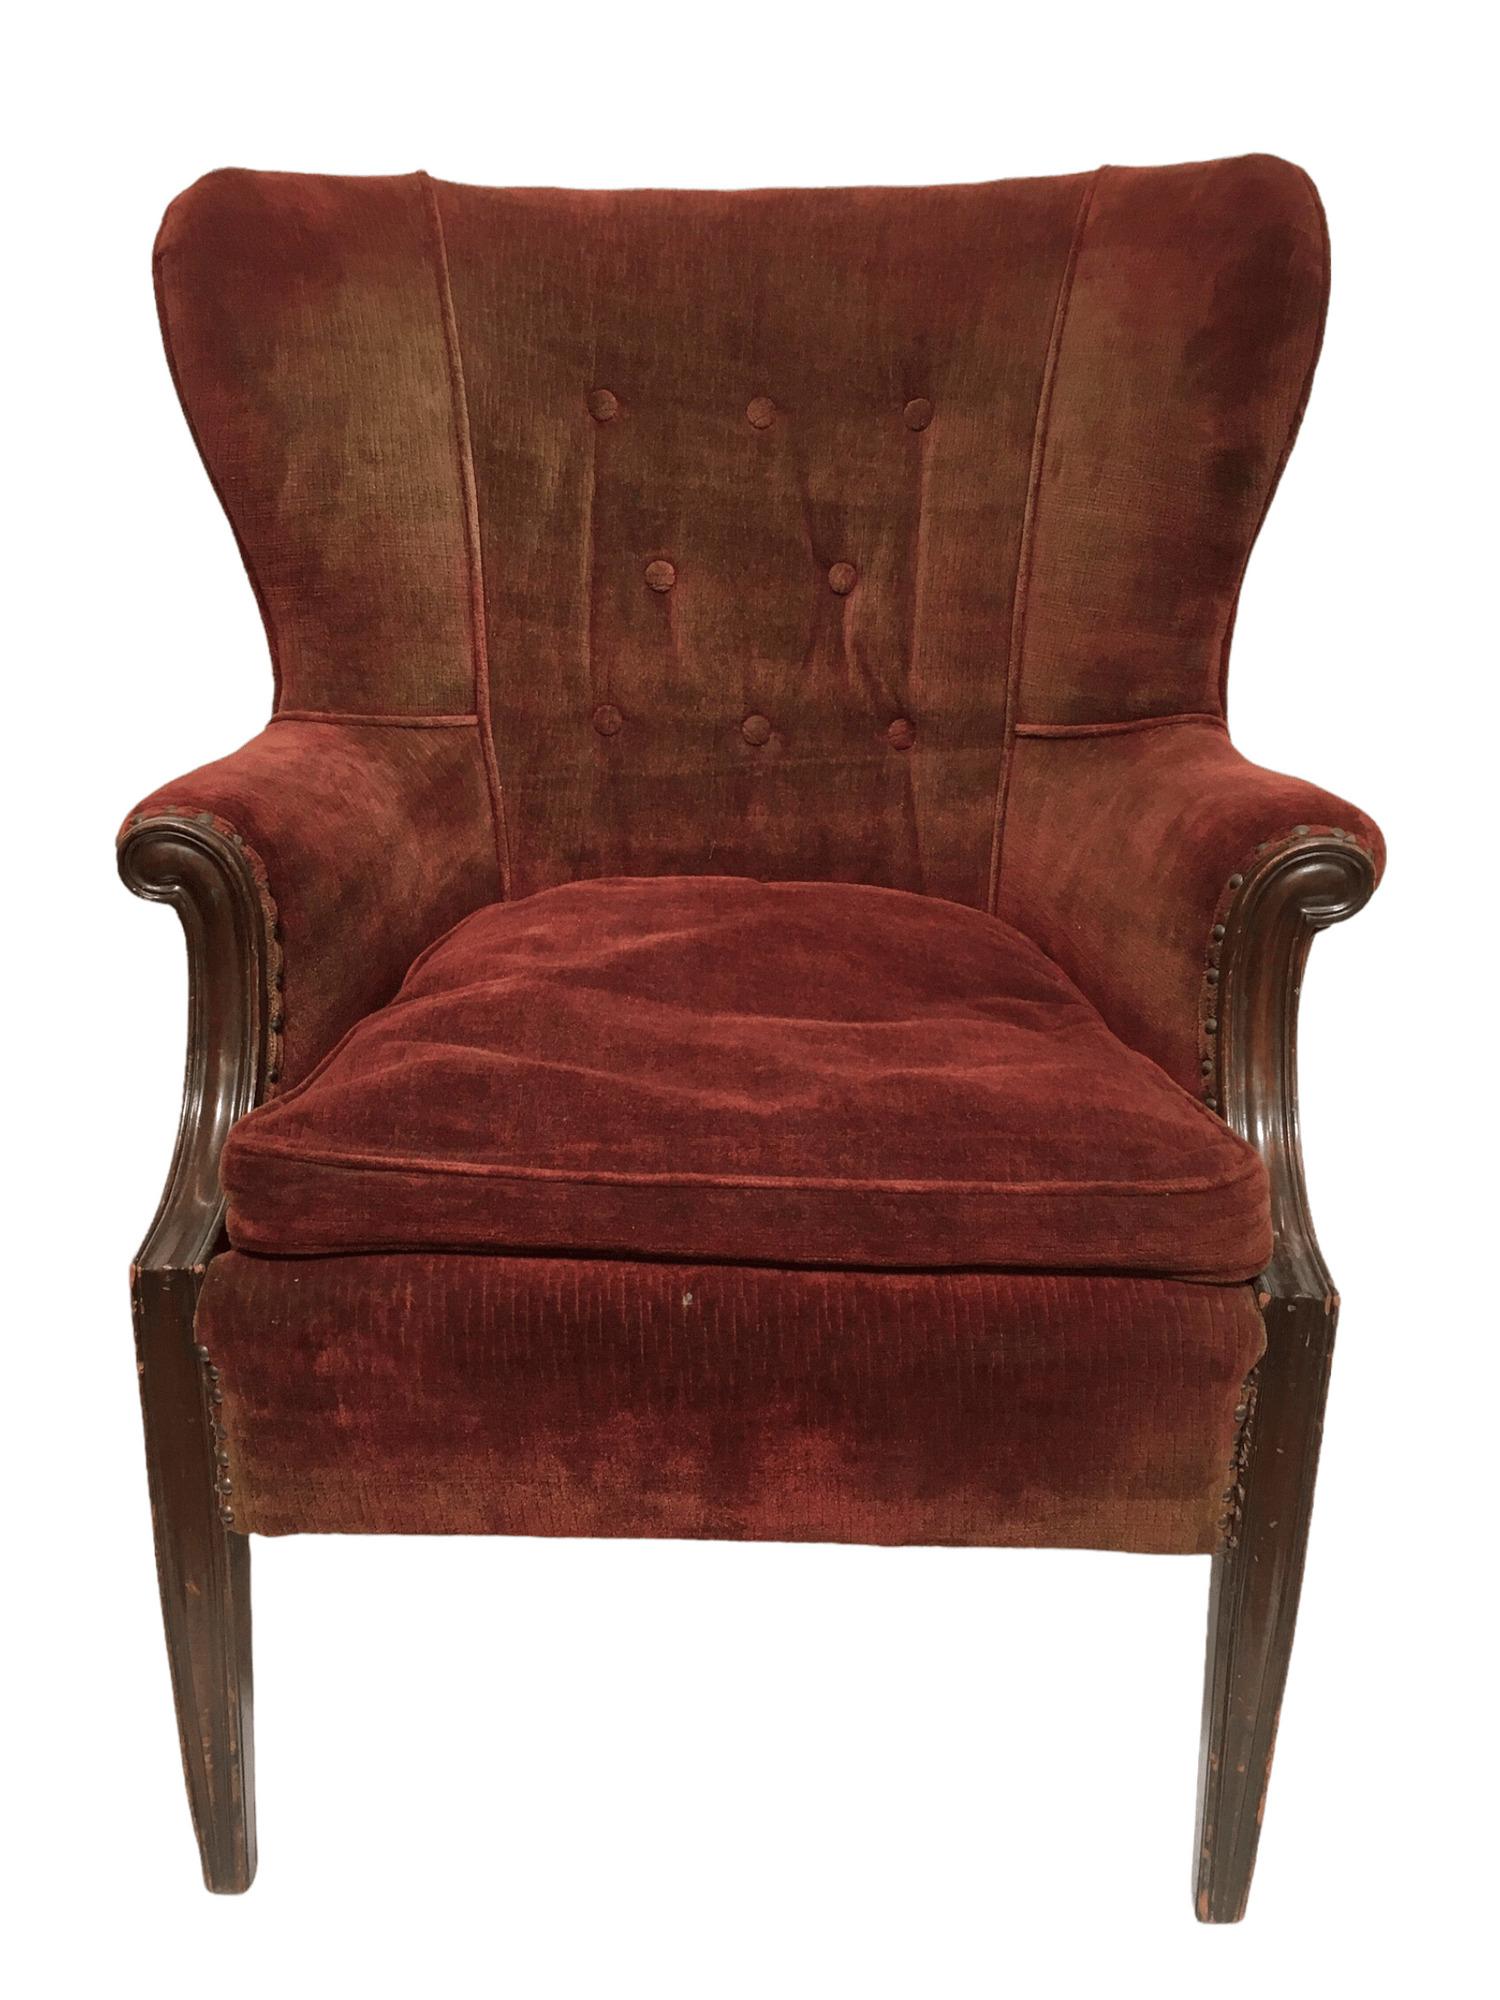 Vintage Wingback armchair upholstered in a light red fabric that fades in areas almost to brown. This armchair features mahogany wood legs, armrests with a subtle scrolling detail, and a button-tufted padded backrest.
 
It has signs of age that give